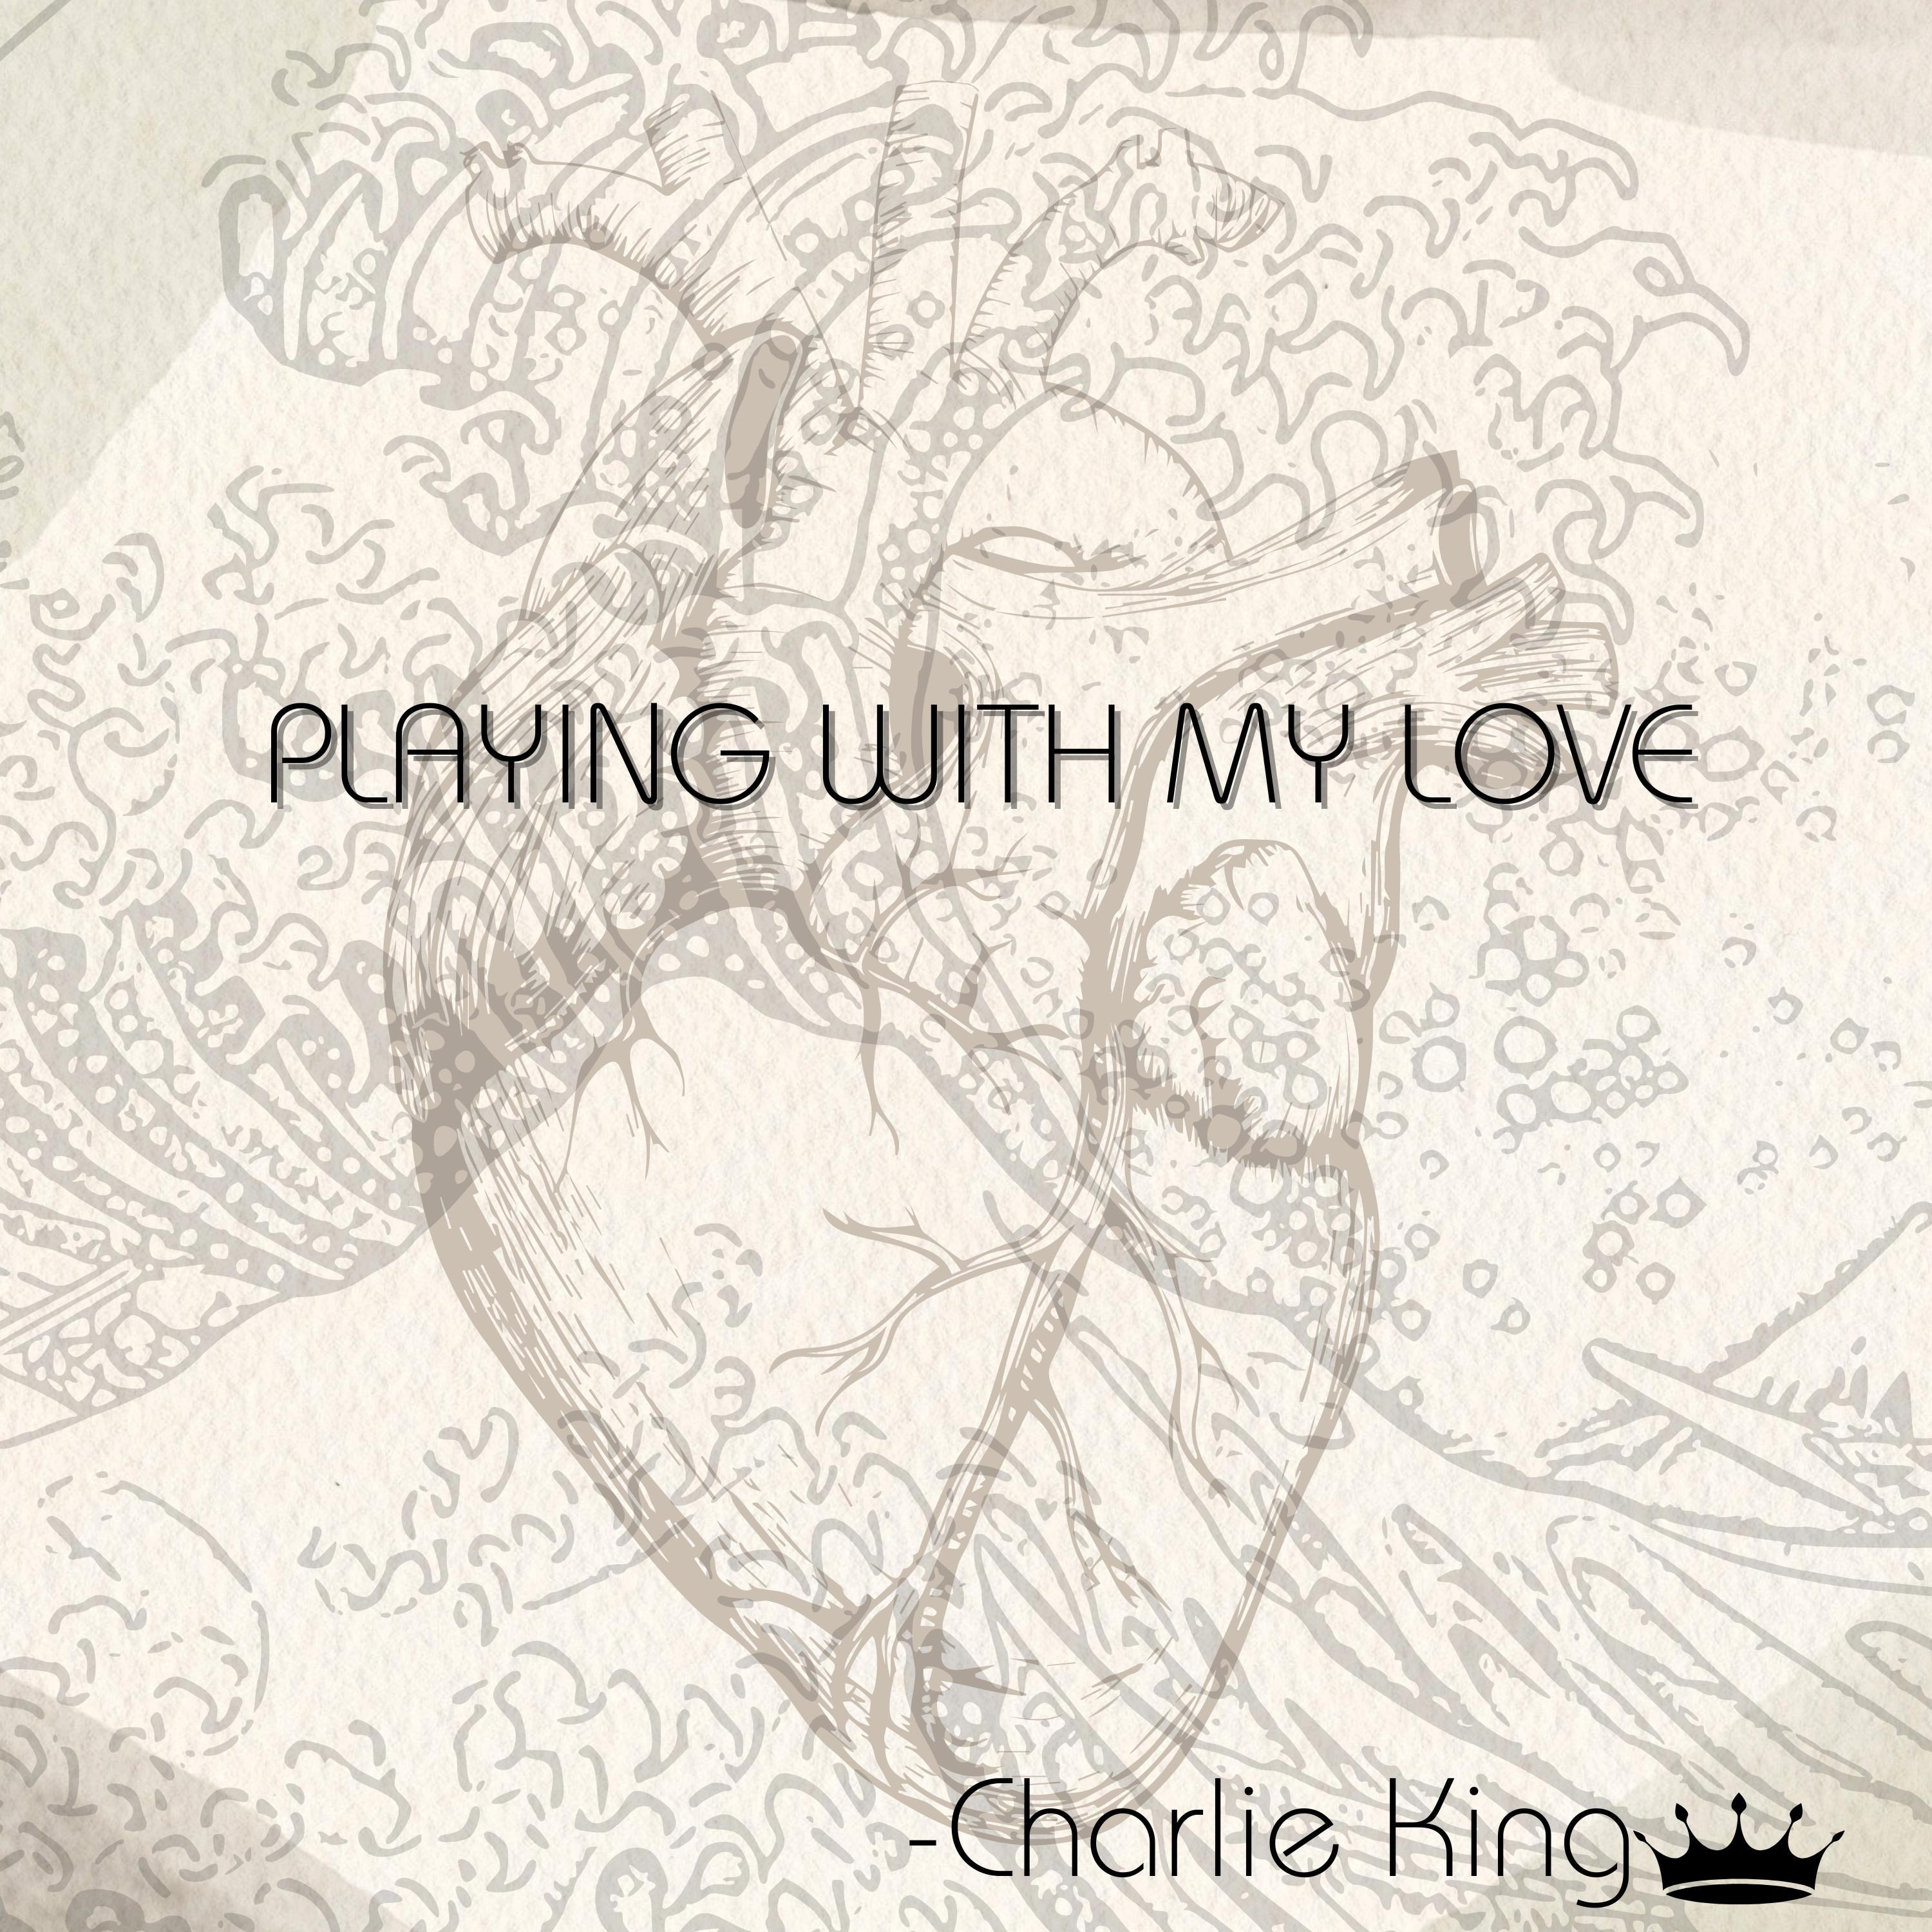 Charlie King - Playing With My Love